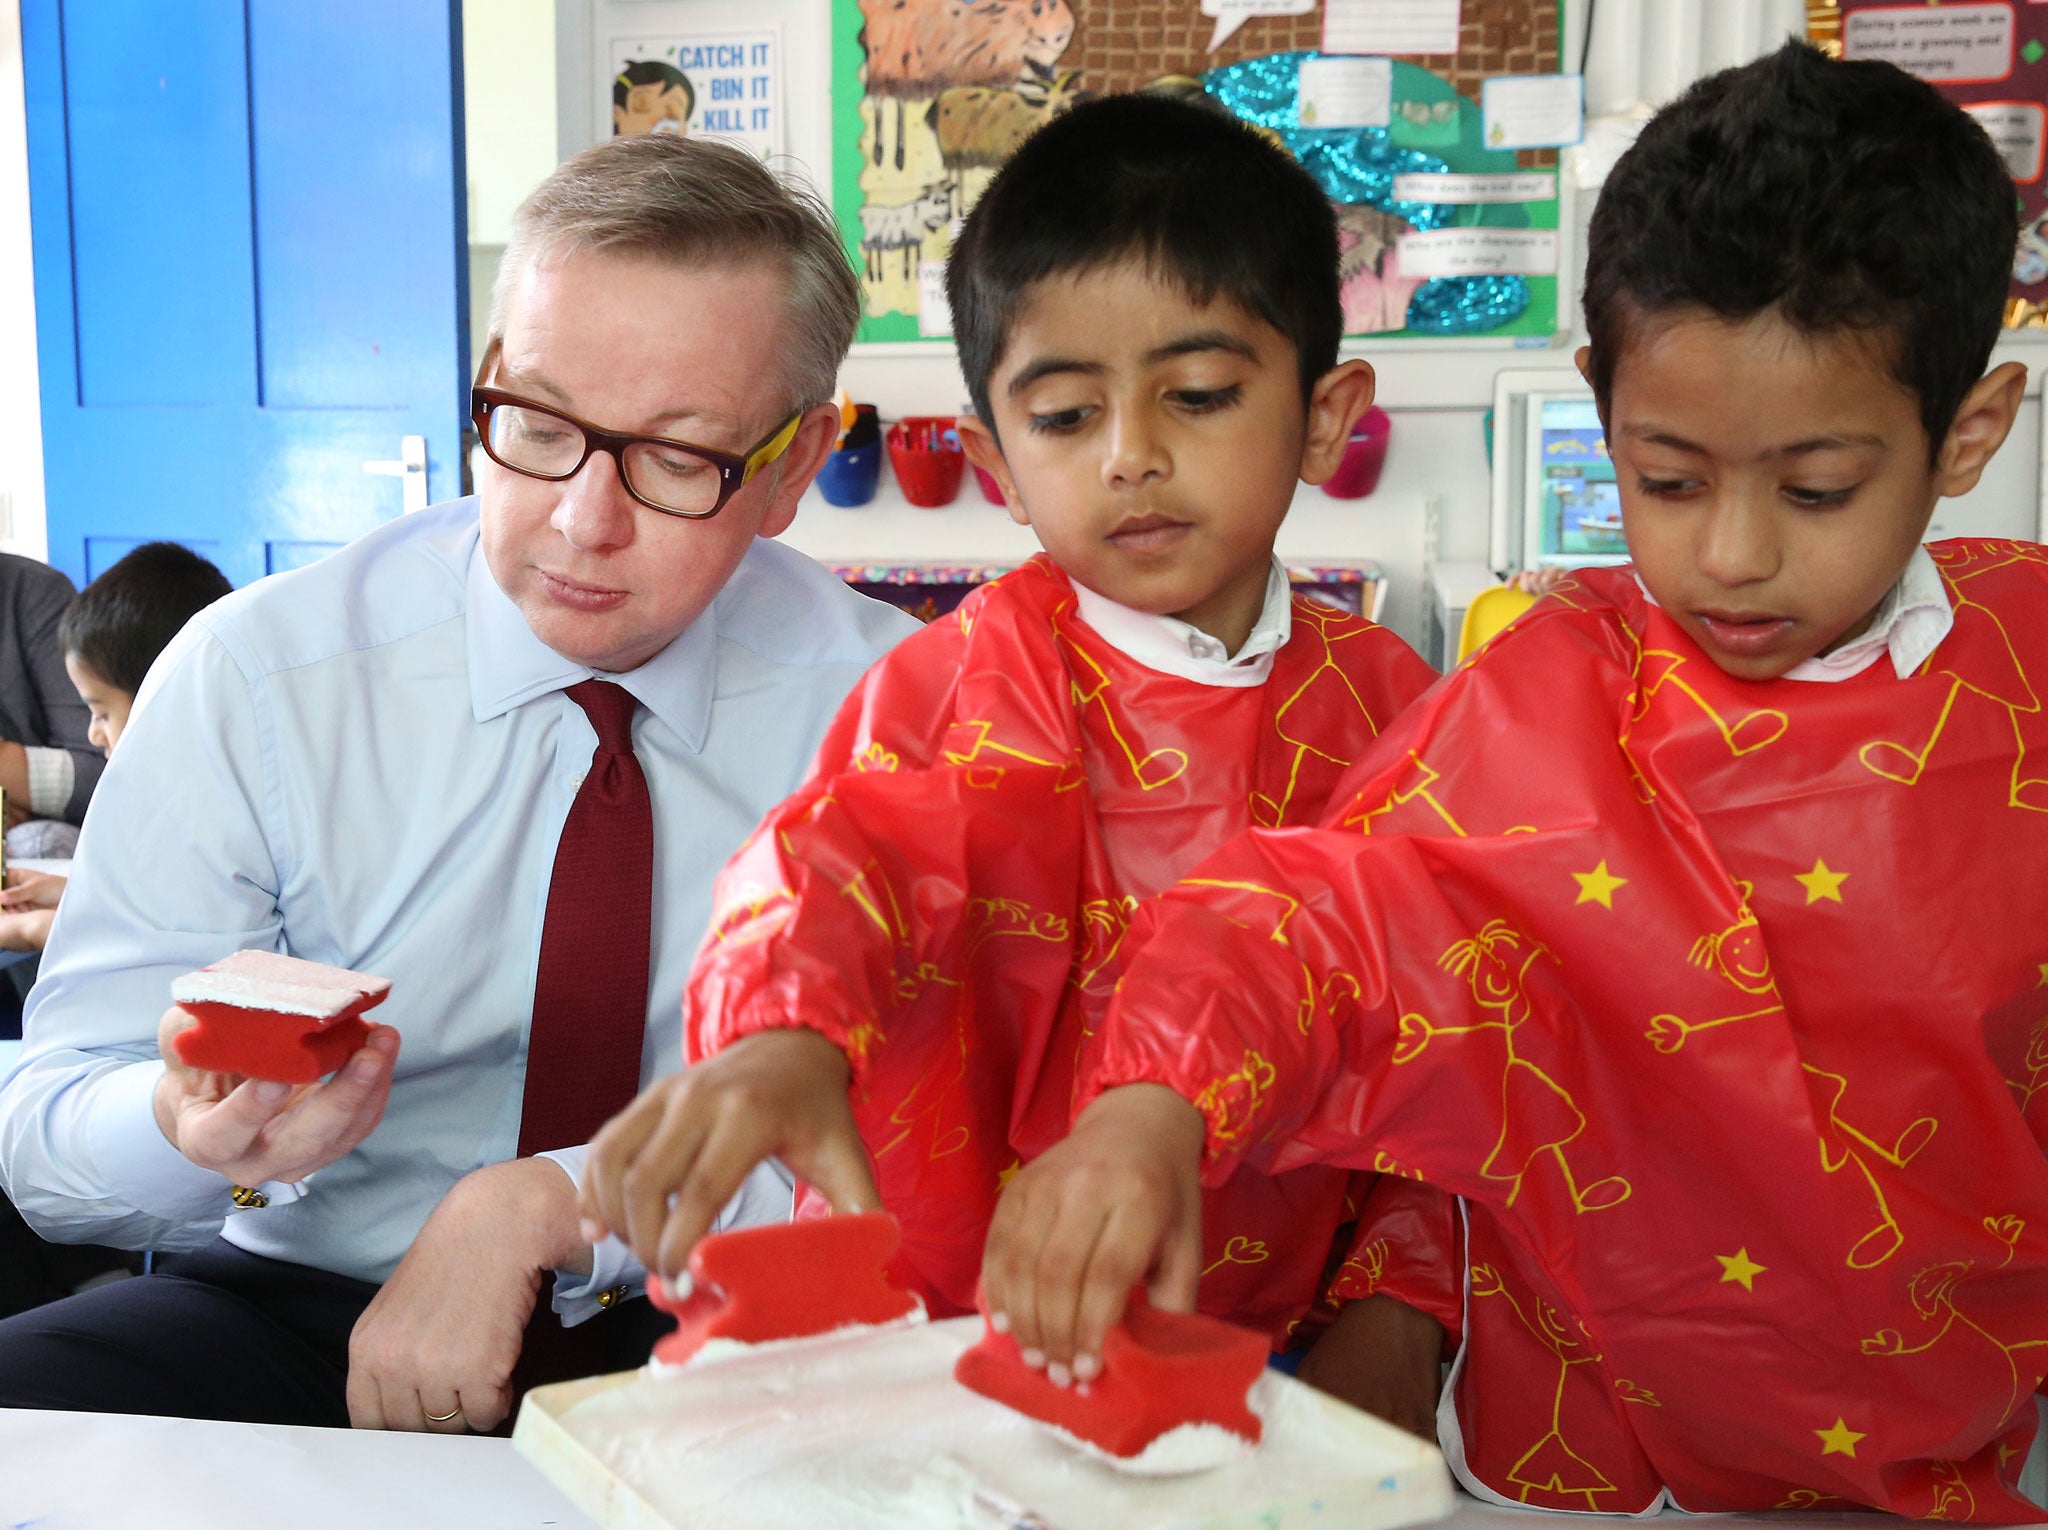 Education Secretary Michael Gove holds a paint sponge as he helps paint a picture of Canary Wharf during a visit to Old Ford Primary School